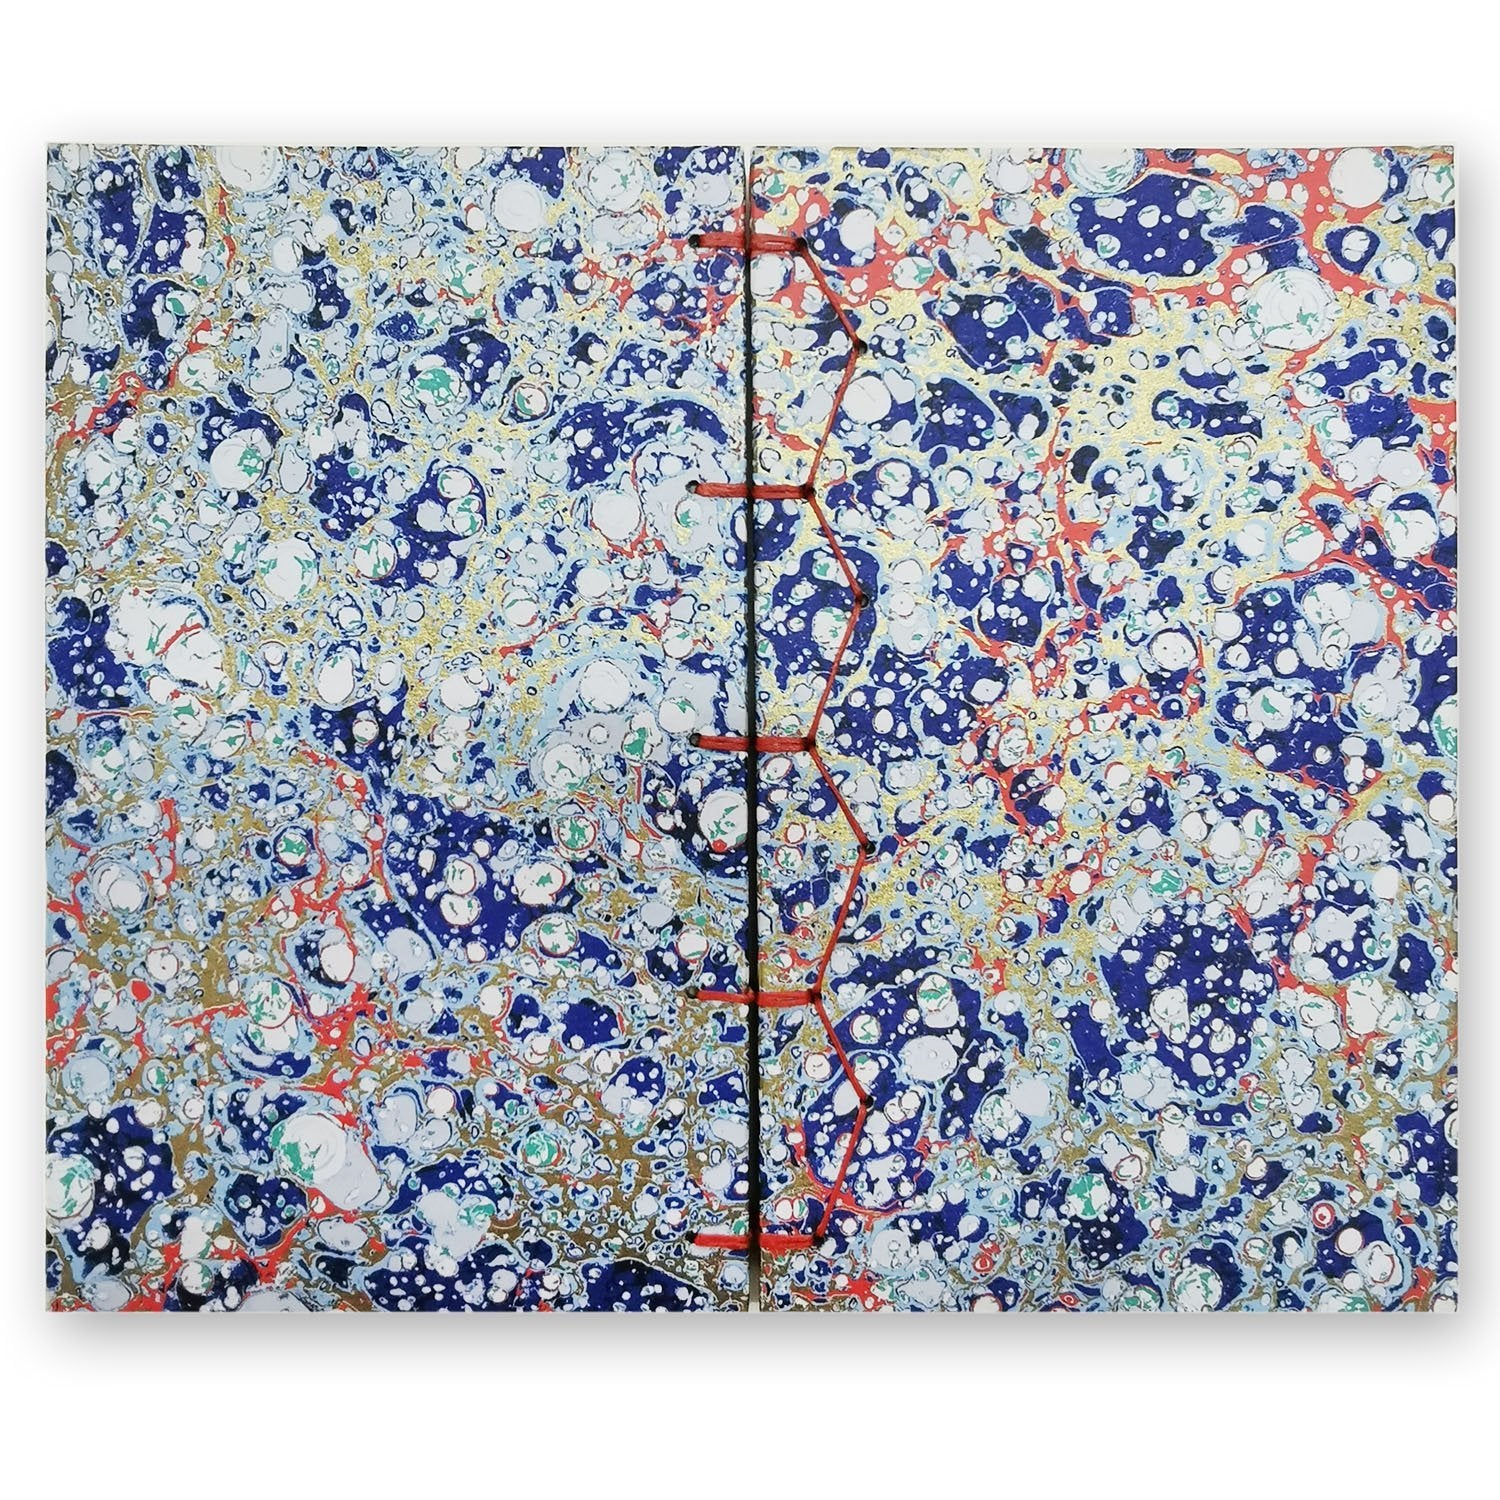 2023 Weekly Calendar with Byzantine Binding - Marbled Blue